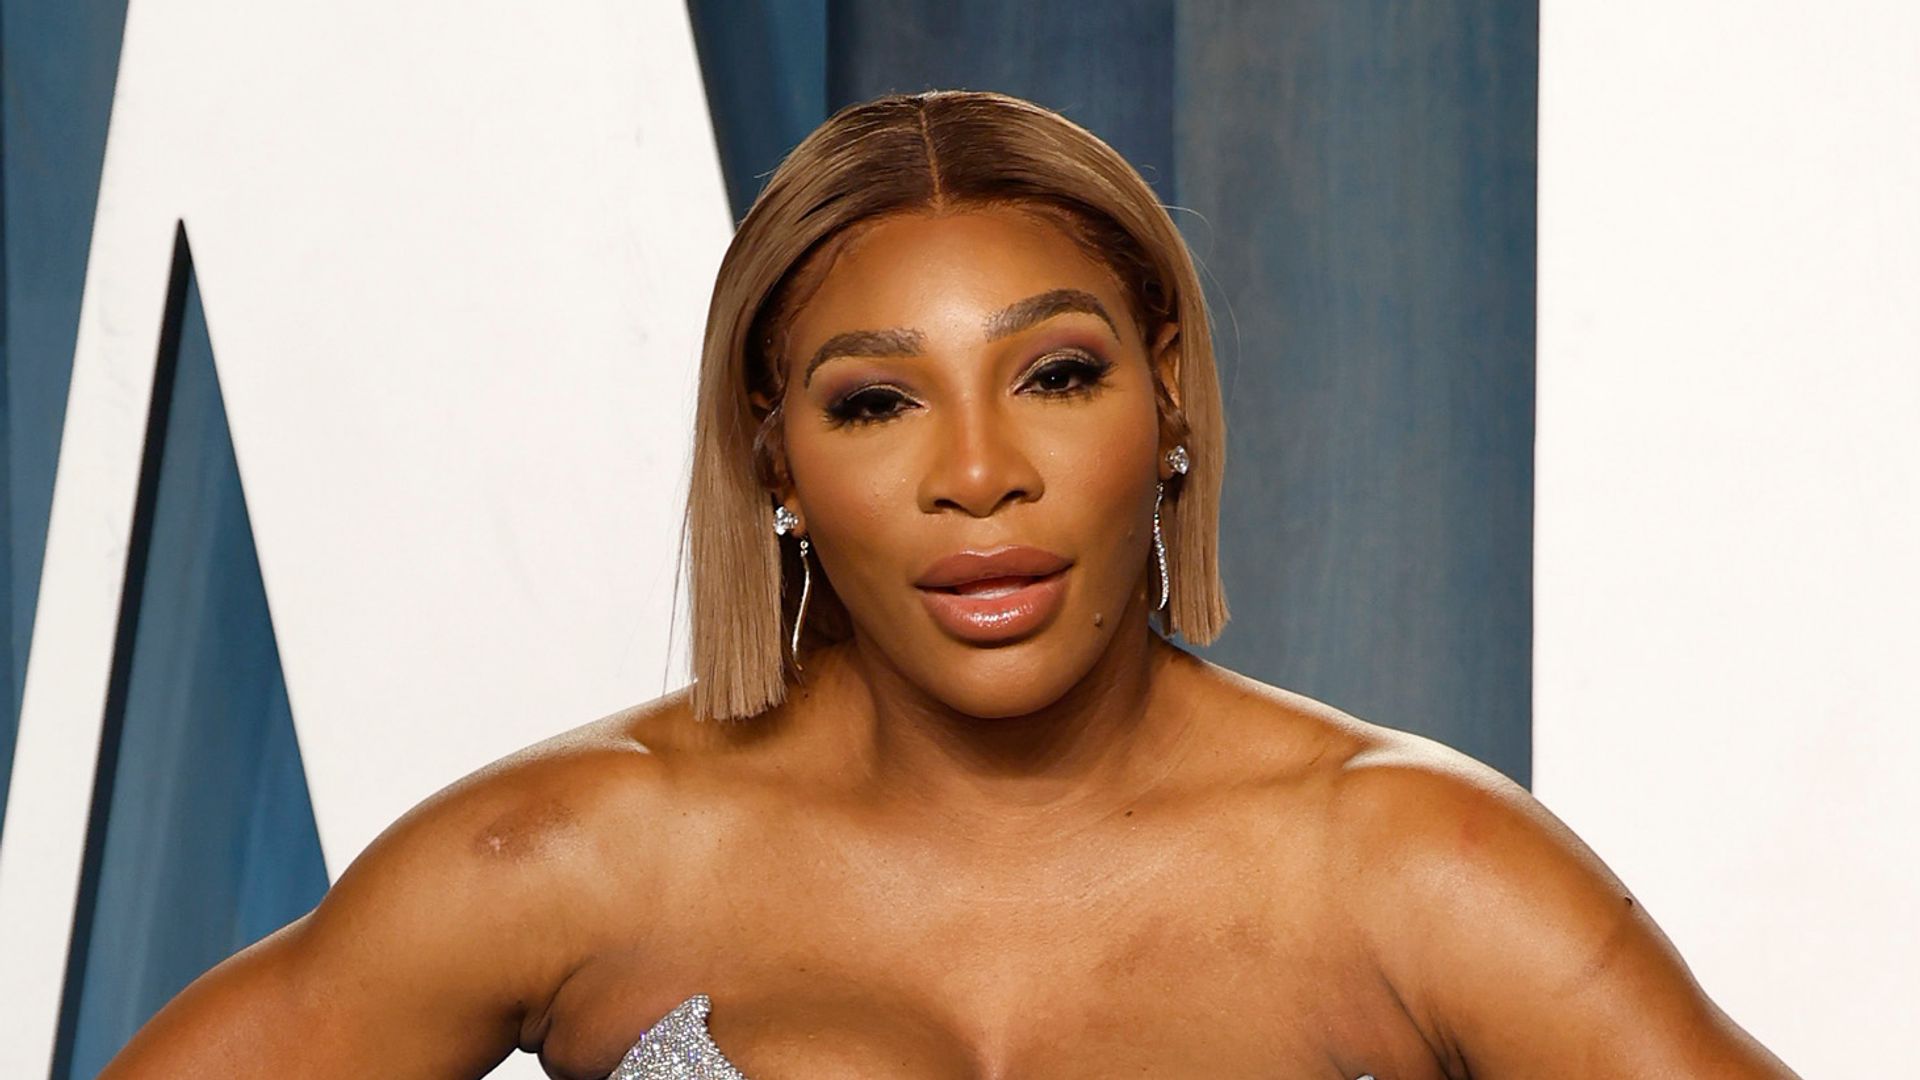 Serena Williams displays incredible curvaceous figure in striking swimsuit photos